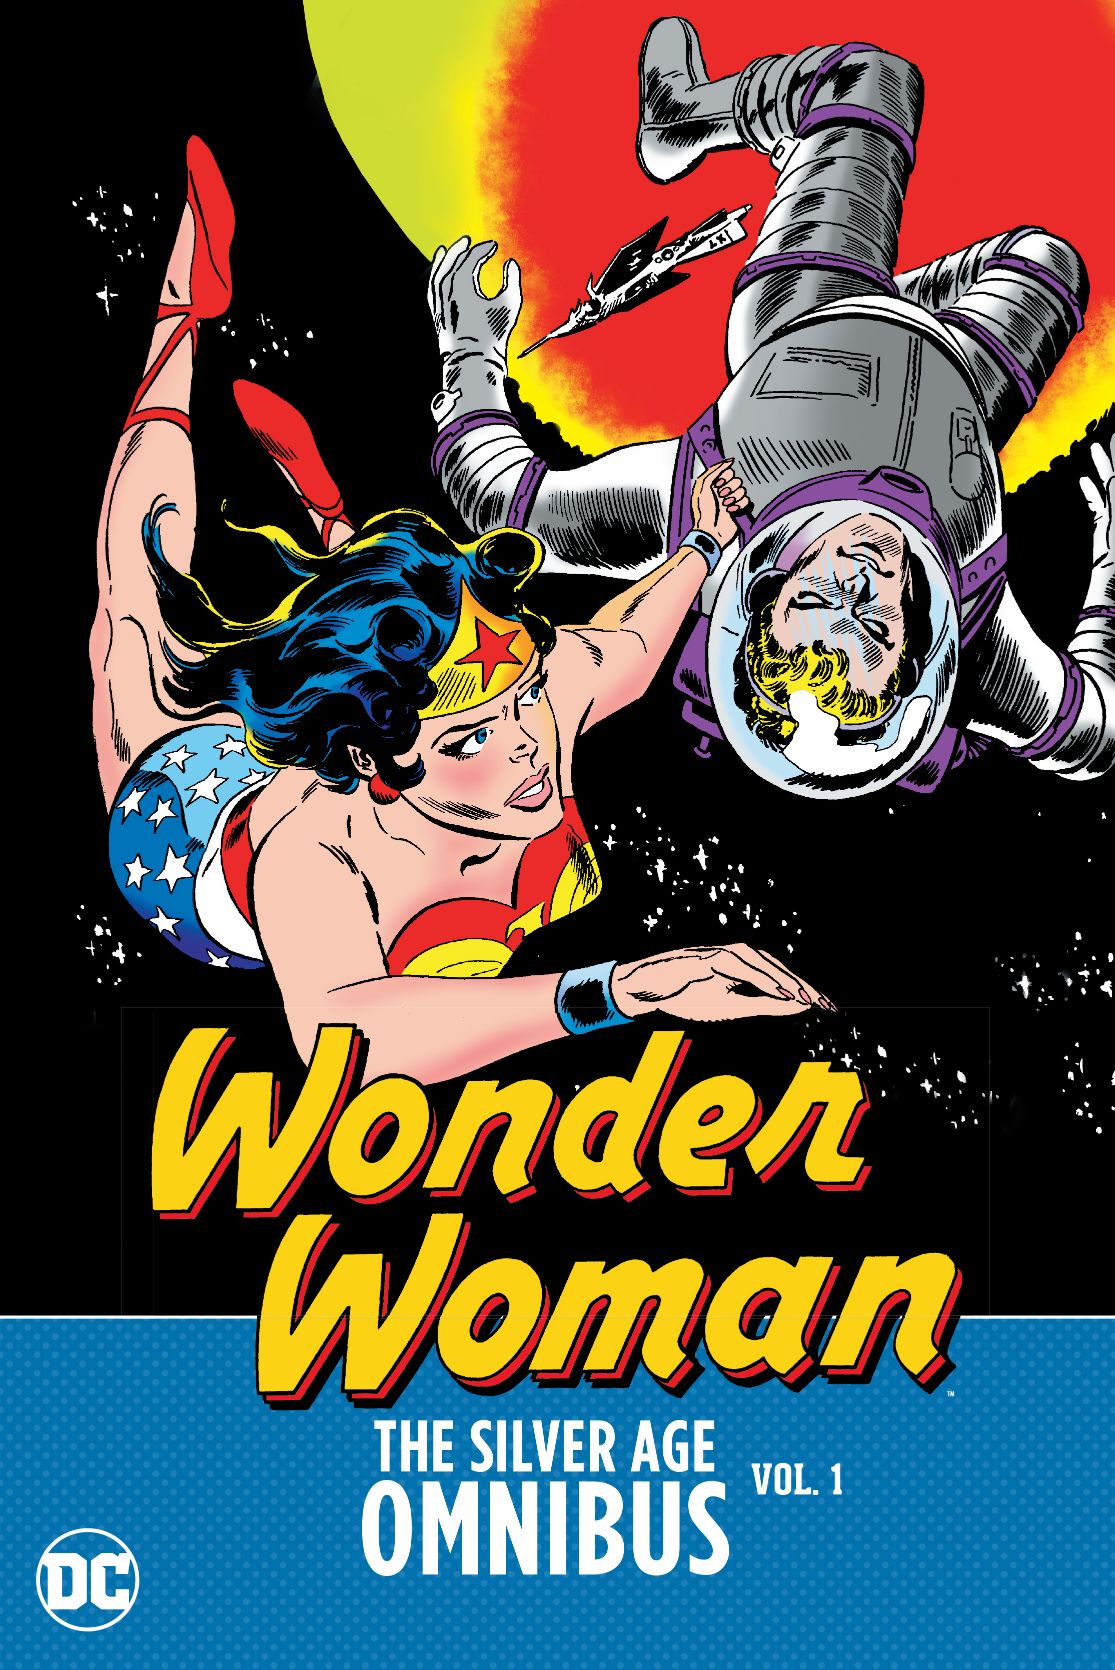 Wonder Woman: The Silver Age Omnibus Vol. 1 (Hardcover)